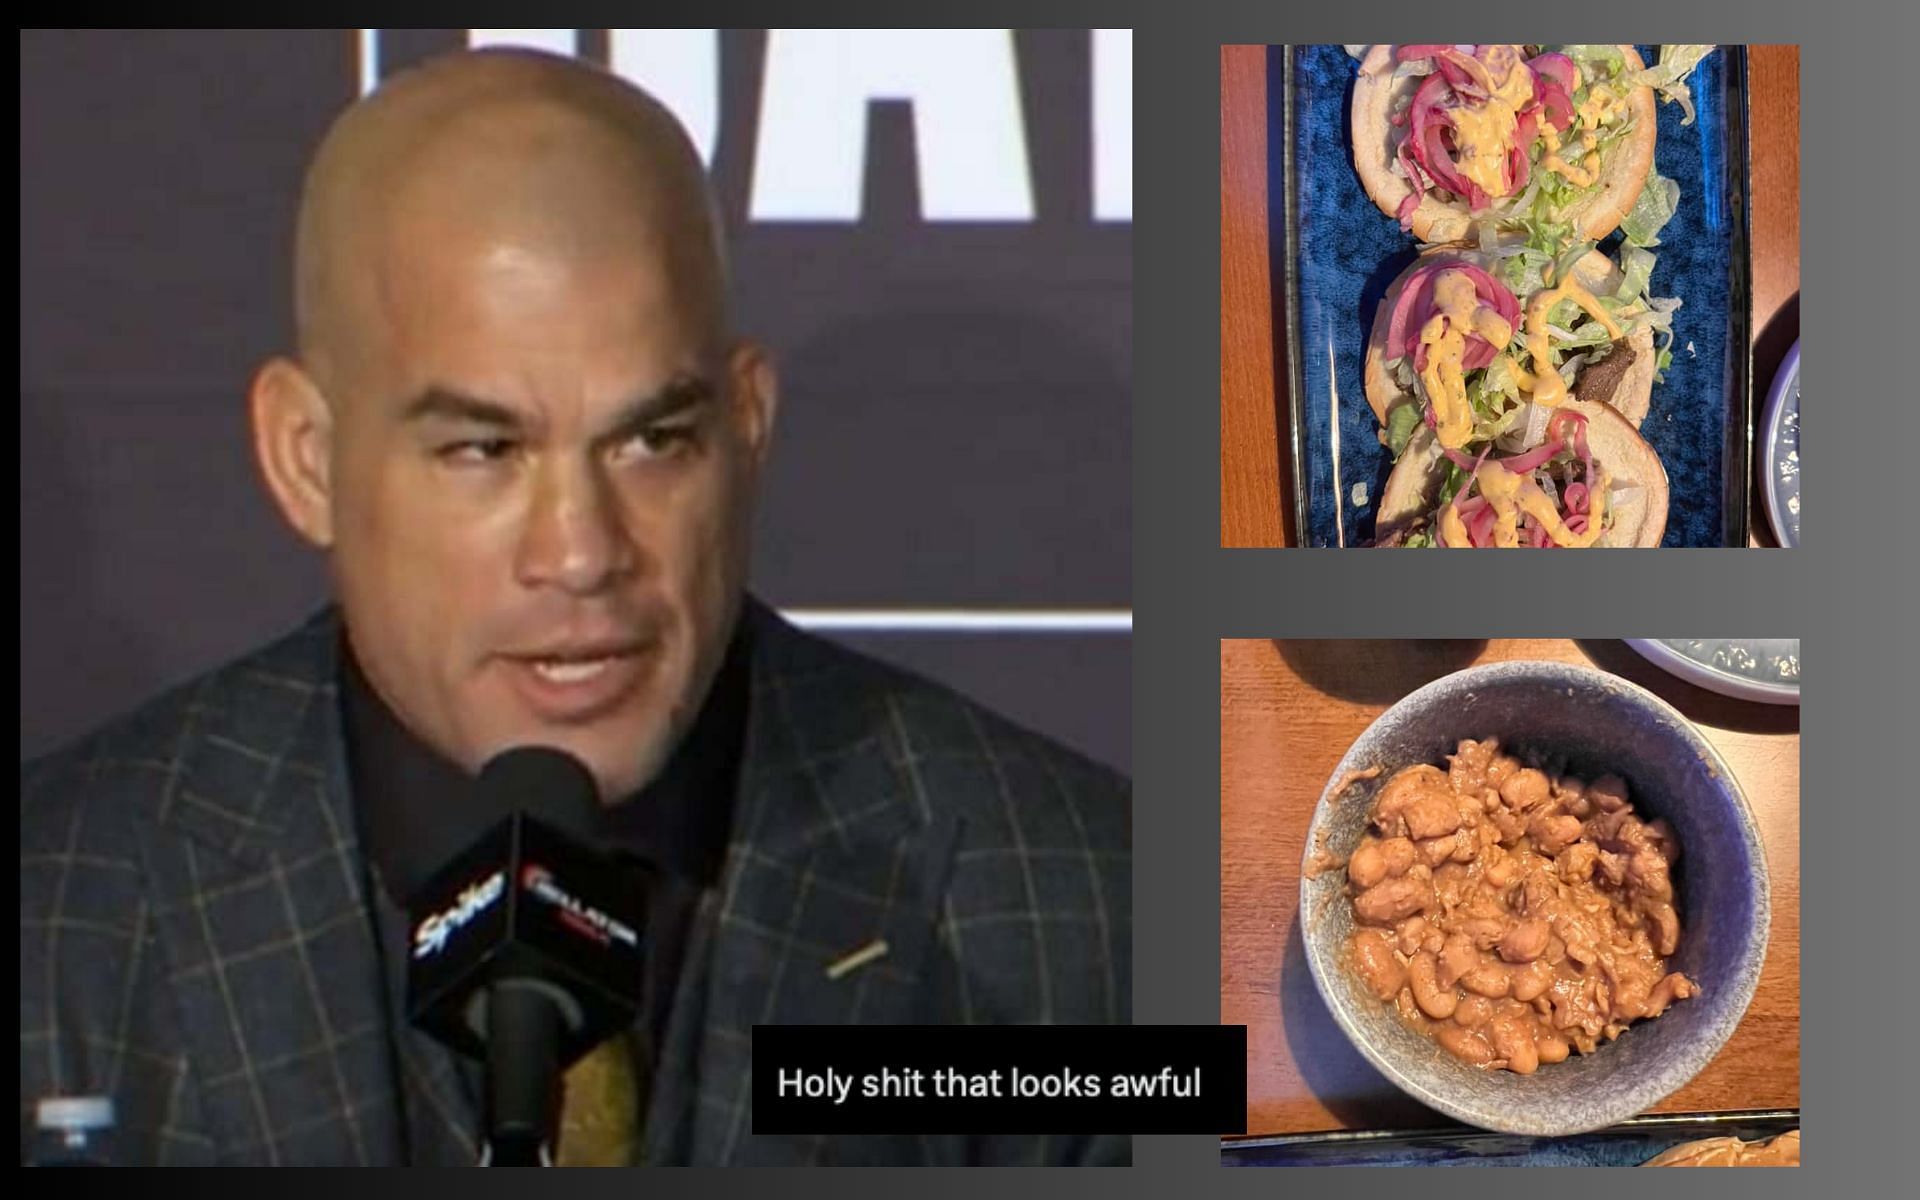 Tito Ortiz, Images of food from his new restaurant (Image Courtesy - MMA News, @FullContactMTWF on Twitter/X)